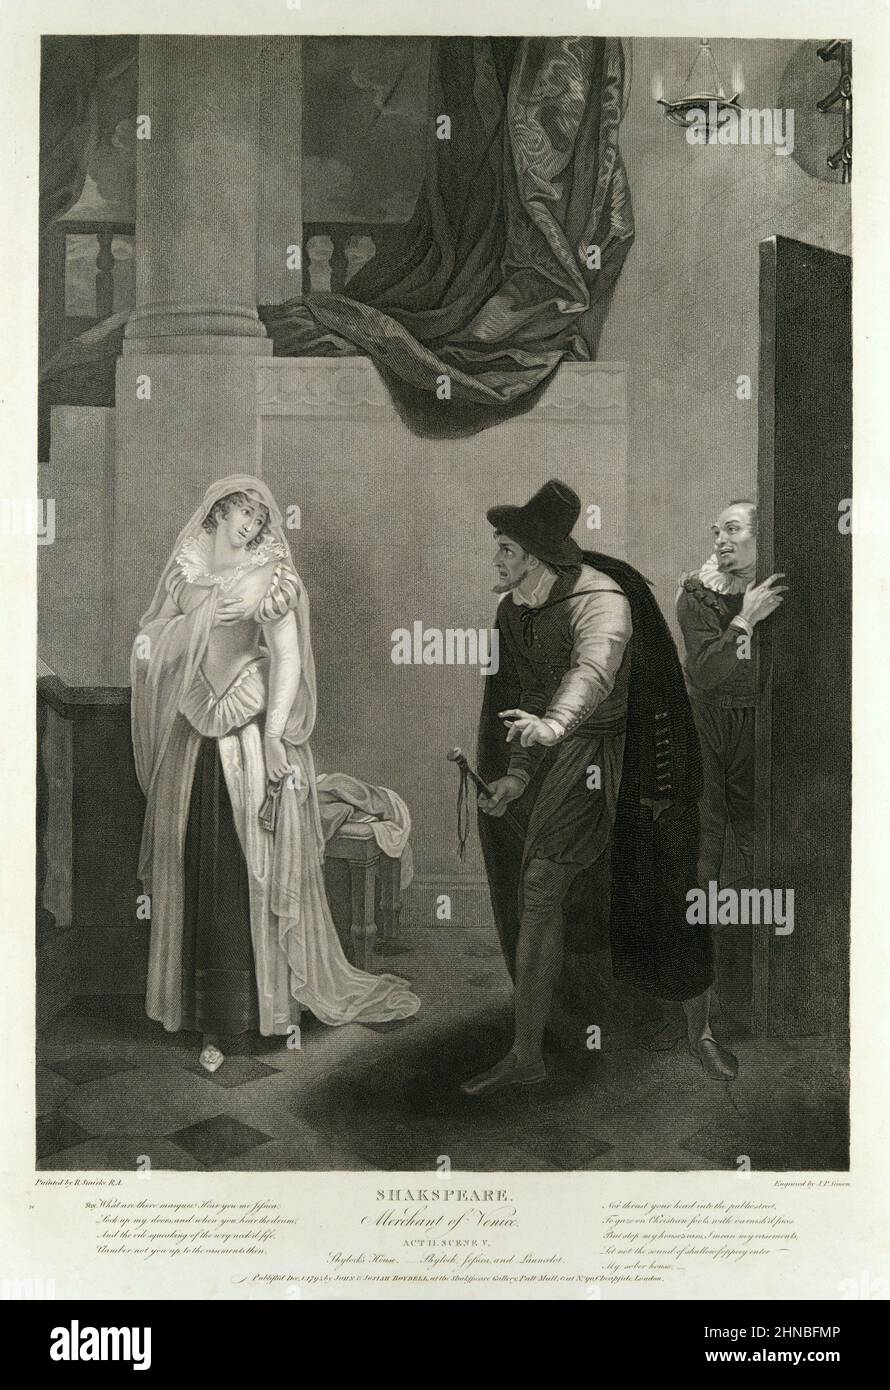 Shylock, Jessica and Launcelot in Shylock's House. From Shakespeare's The Merchant of Venice, Act 2, Scene 5 Stock Photo